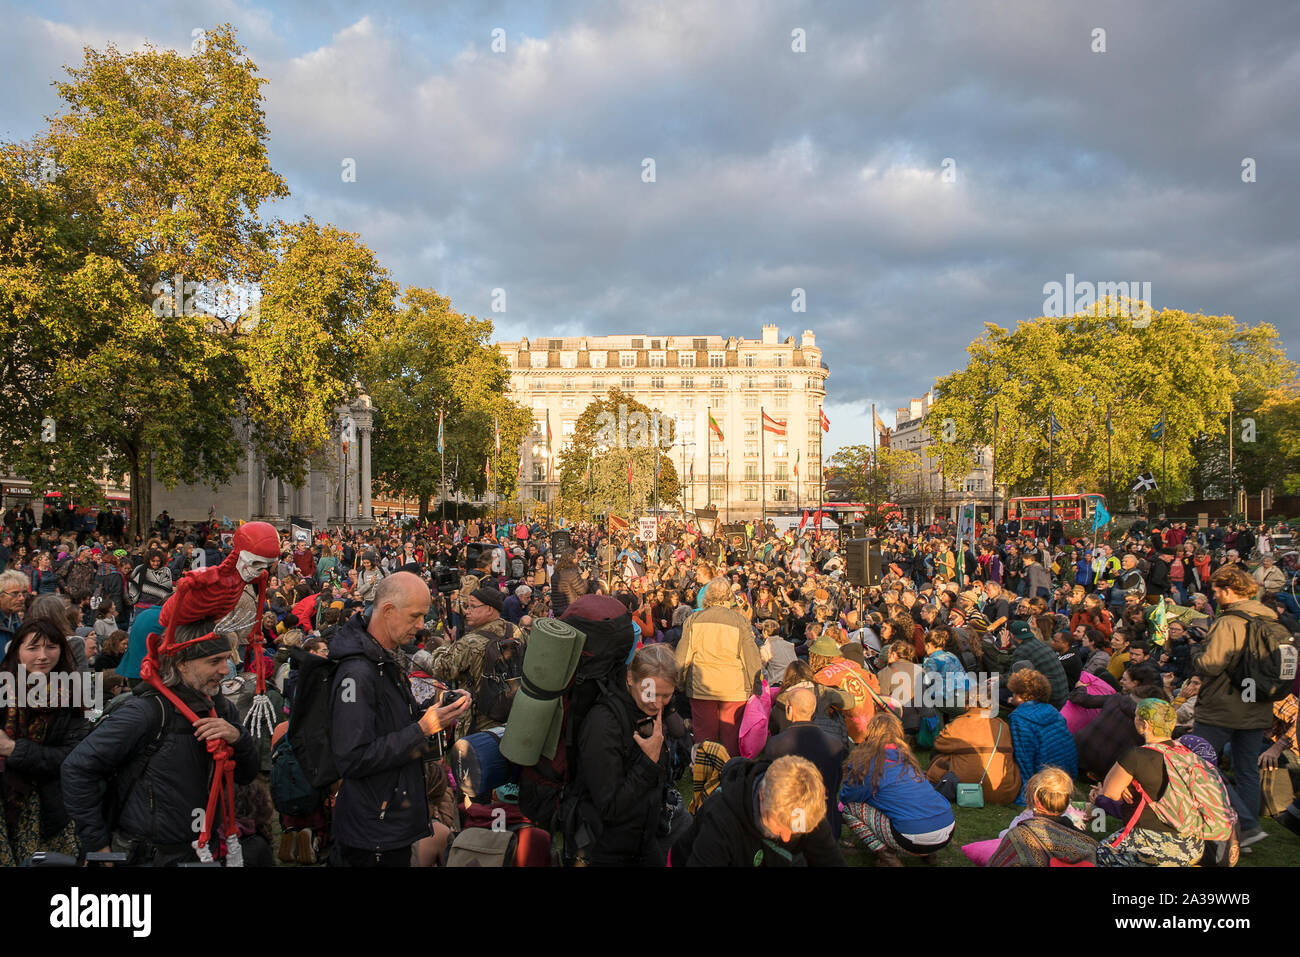 October 6th, 2019, London, UK : Thousands of Extinction Rebellion activists gather at Marble Arch for the Opening Ceremony, calling for ' a moment to pause, to draw breath, to take a look inside ourselves and step into this evolutionary moment together'. Several activists lit 'beacons of truth' which will be taken to the various actions in London.  '‘We understand life to be precious. We are hearing the need for a pause so that we can listen for what questions humanity must ask itself before it finds answers that are in full service to all life.  We are asking humanity to listen carefully to i Stock Photo